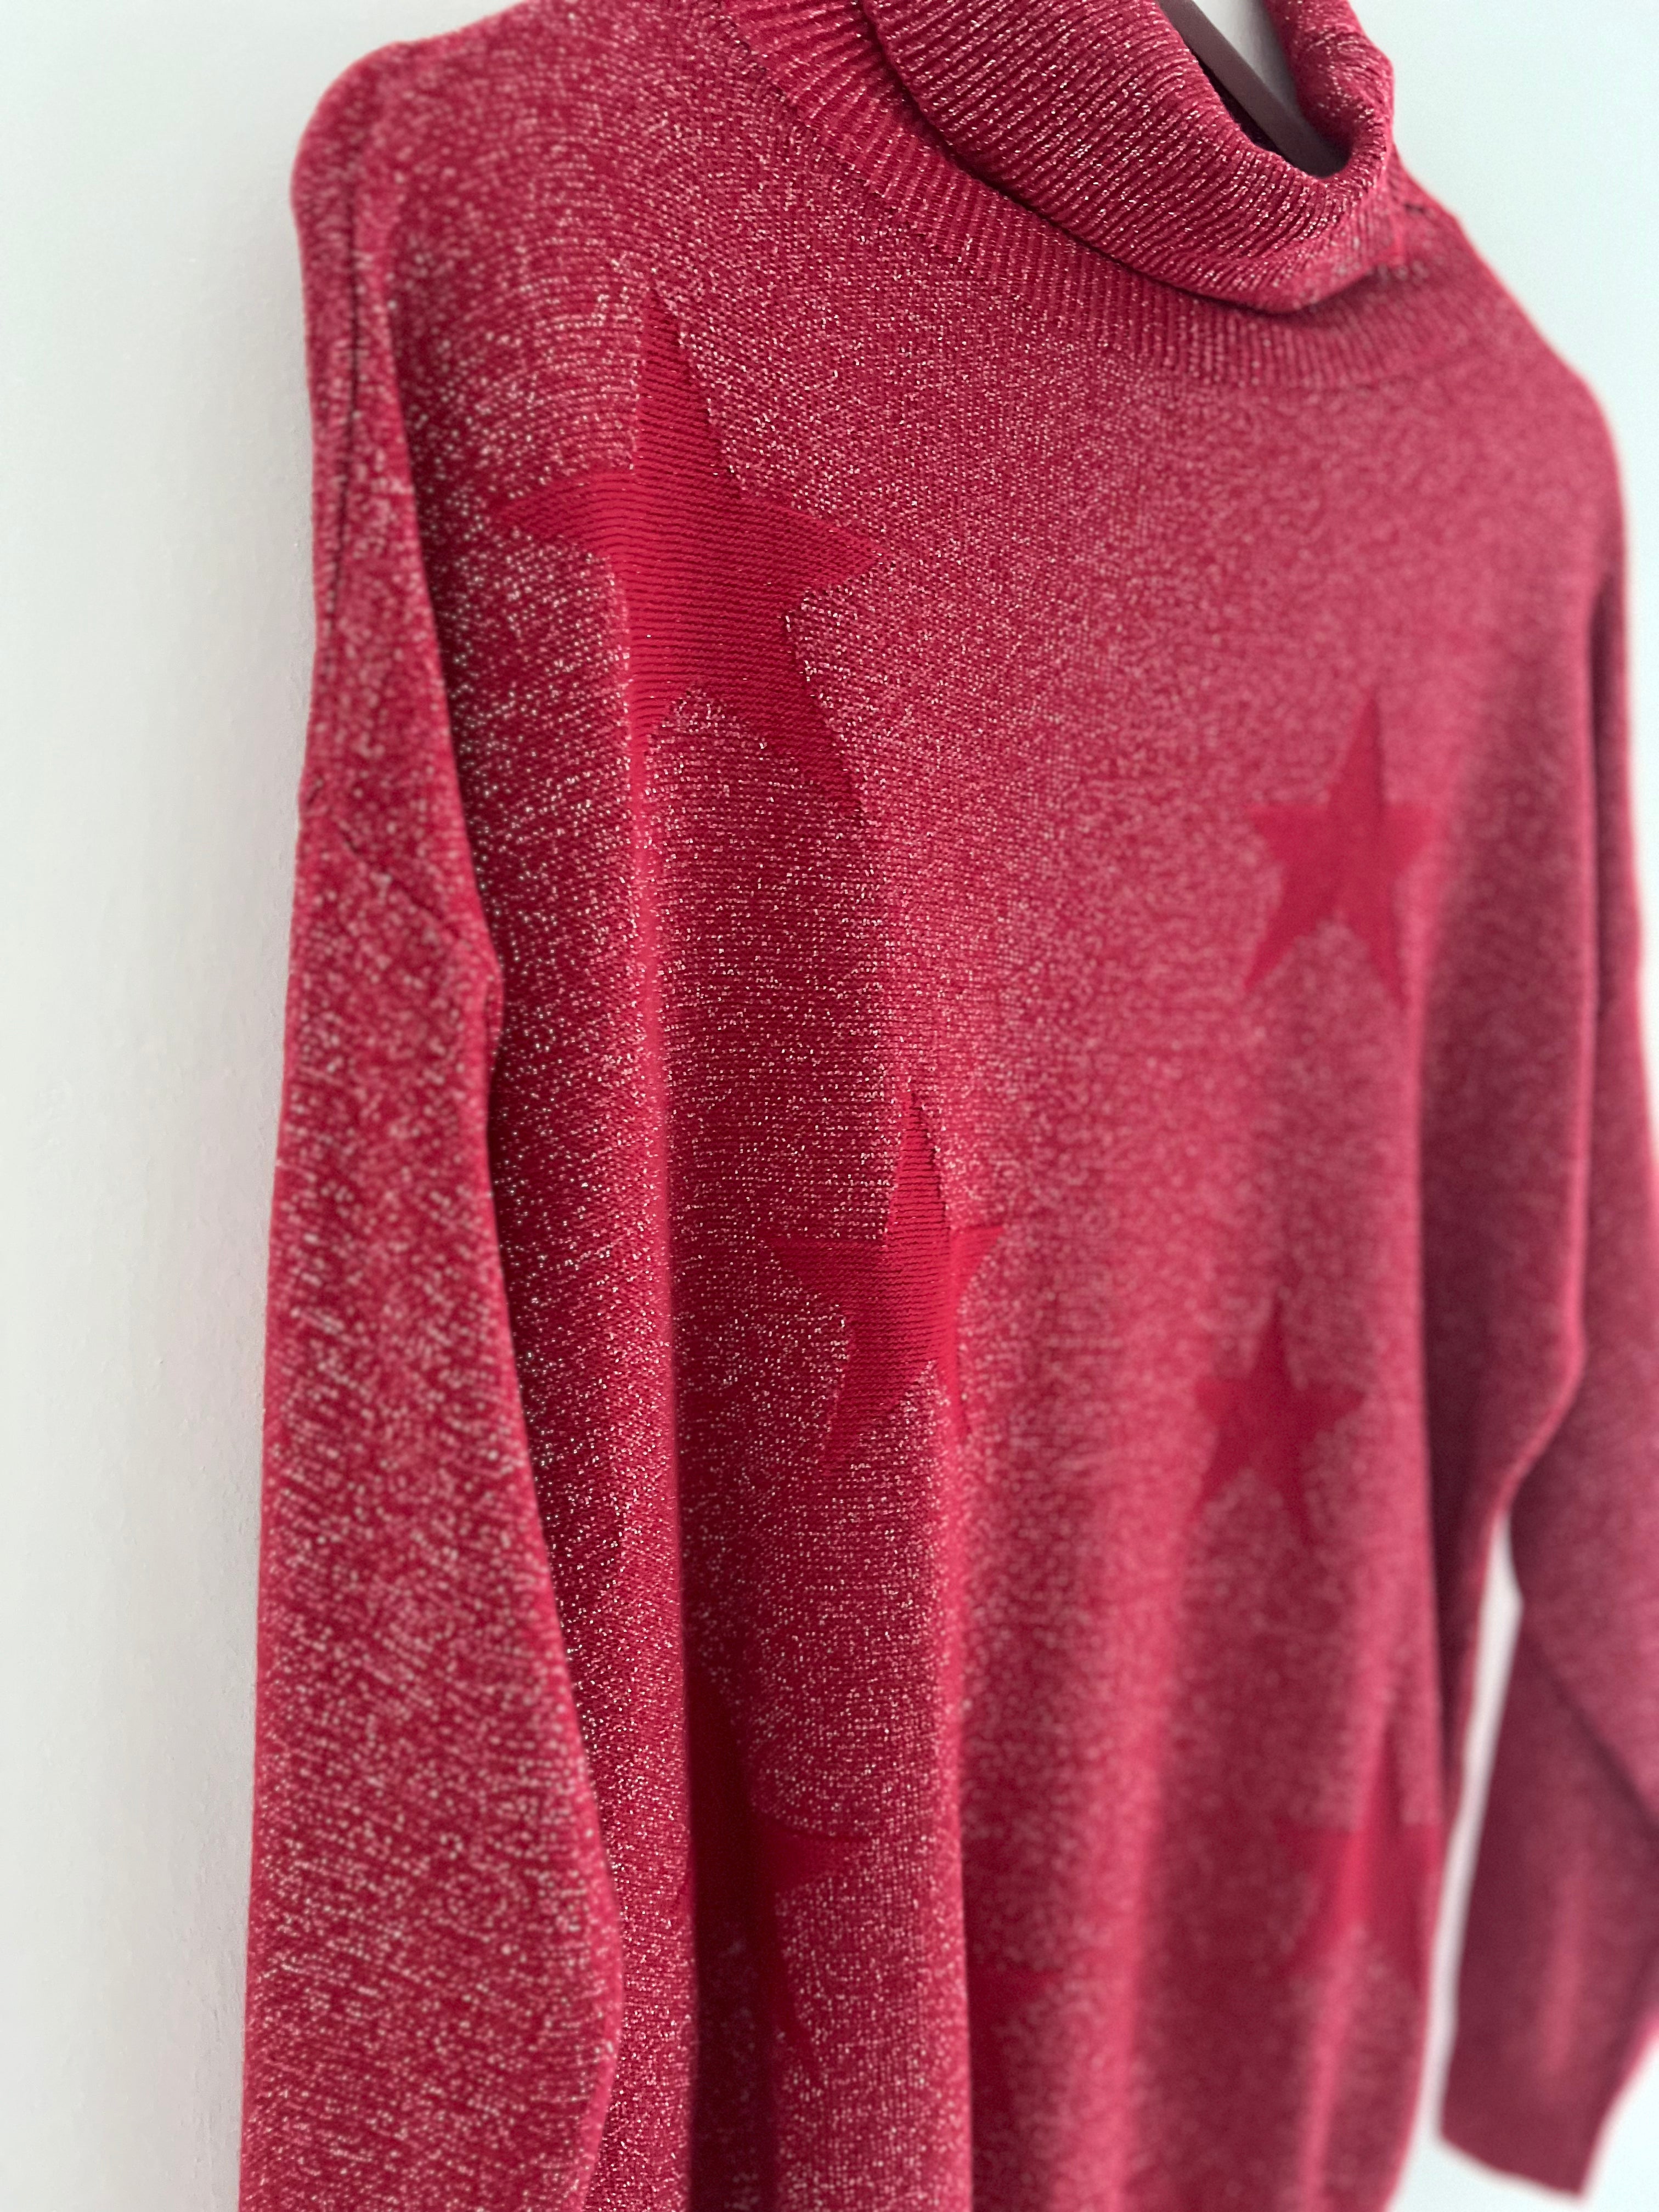 Shimmery Star Jumper in Red